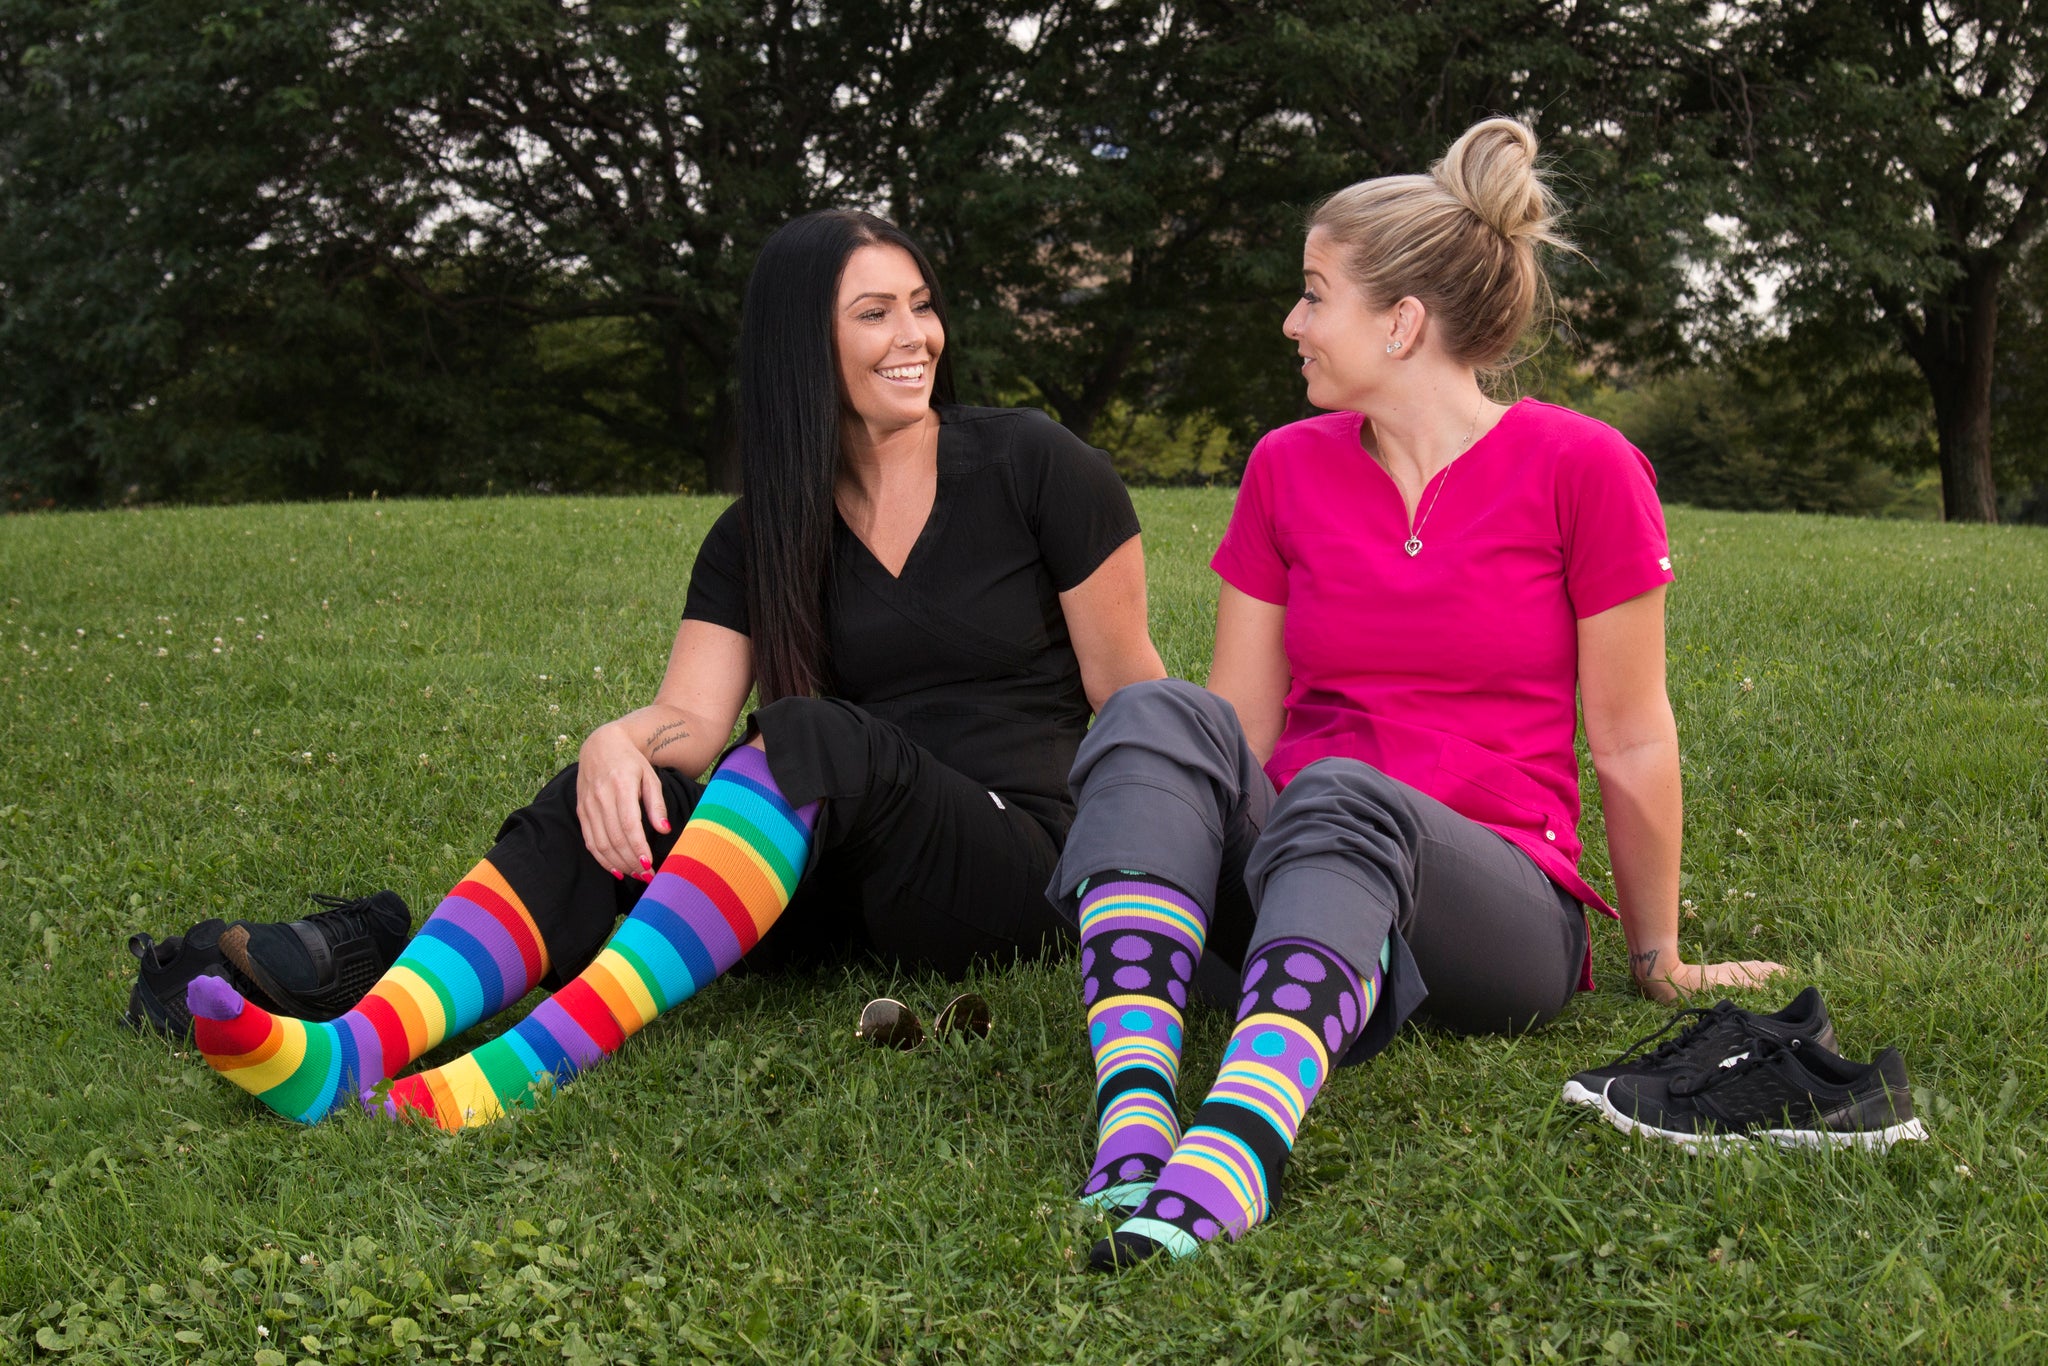 Colourful Compression Socks for Canadians Don't Have to Be Expensive: The Cheap and Cheerful Appeal of Odd Duck Socks